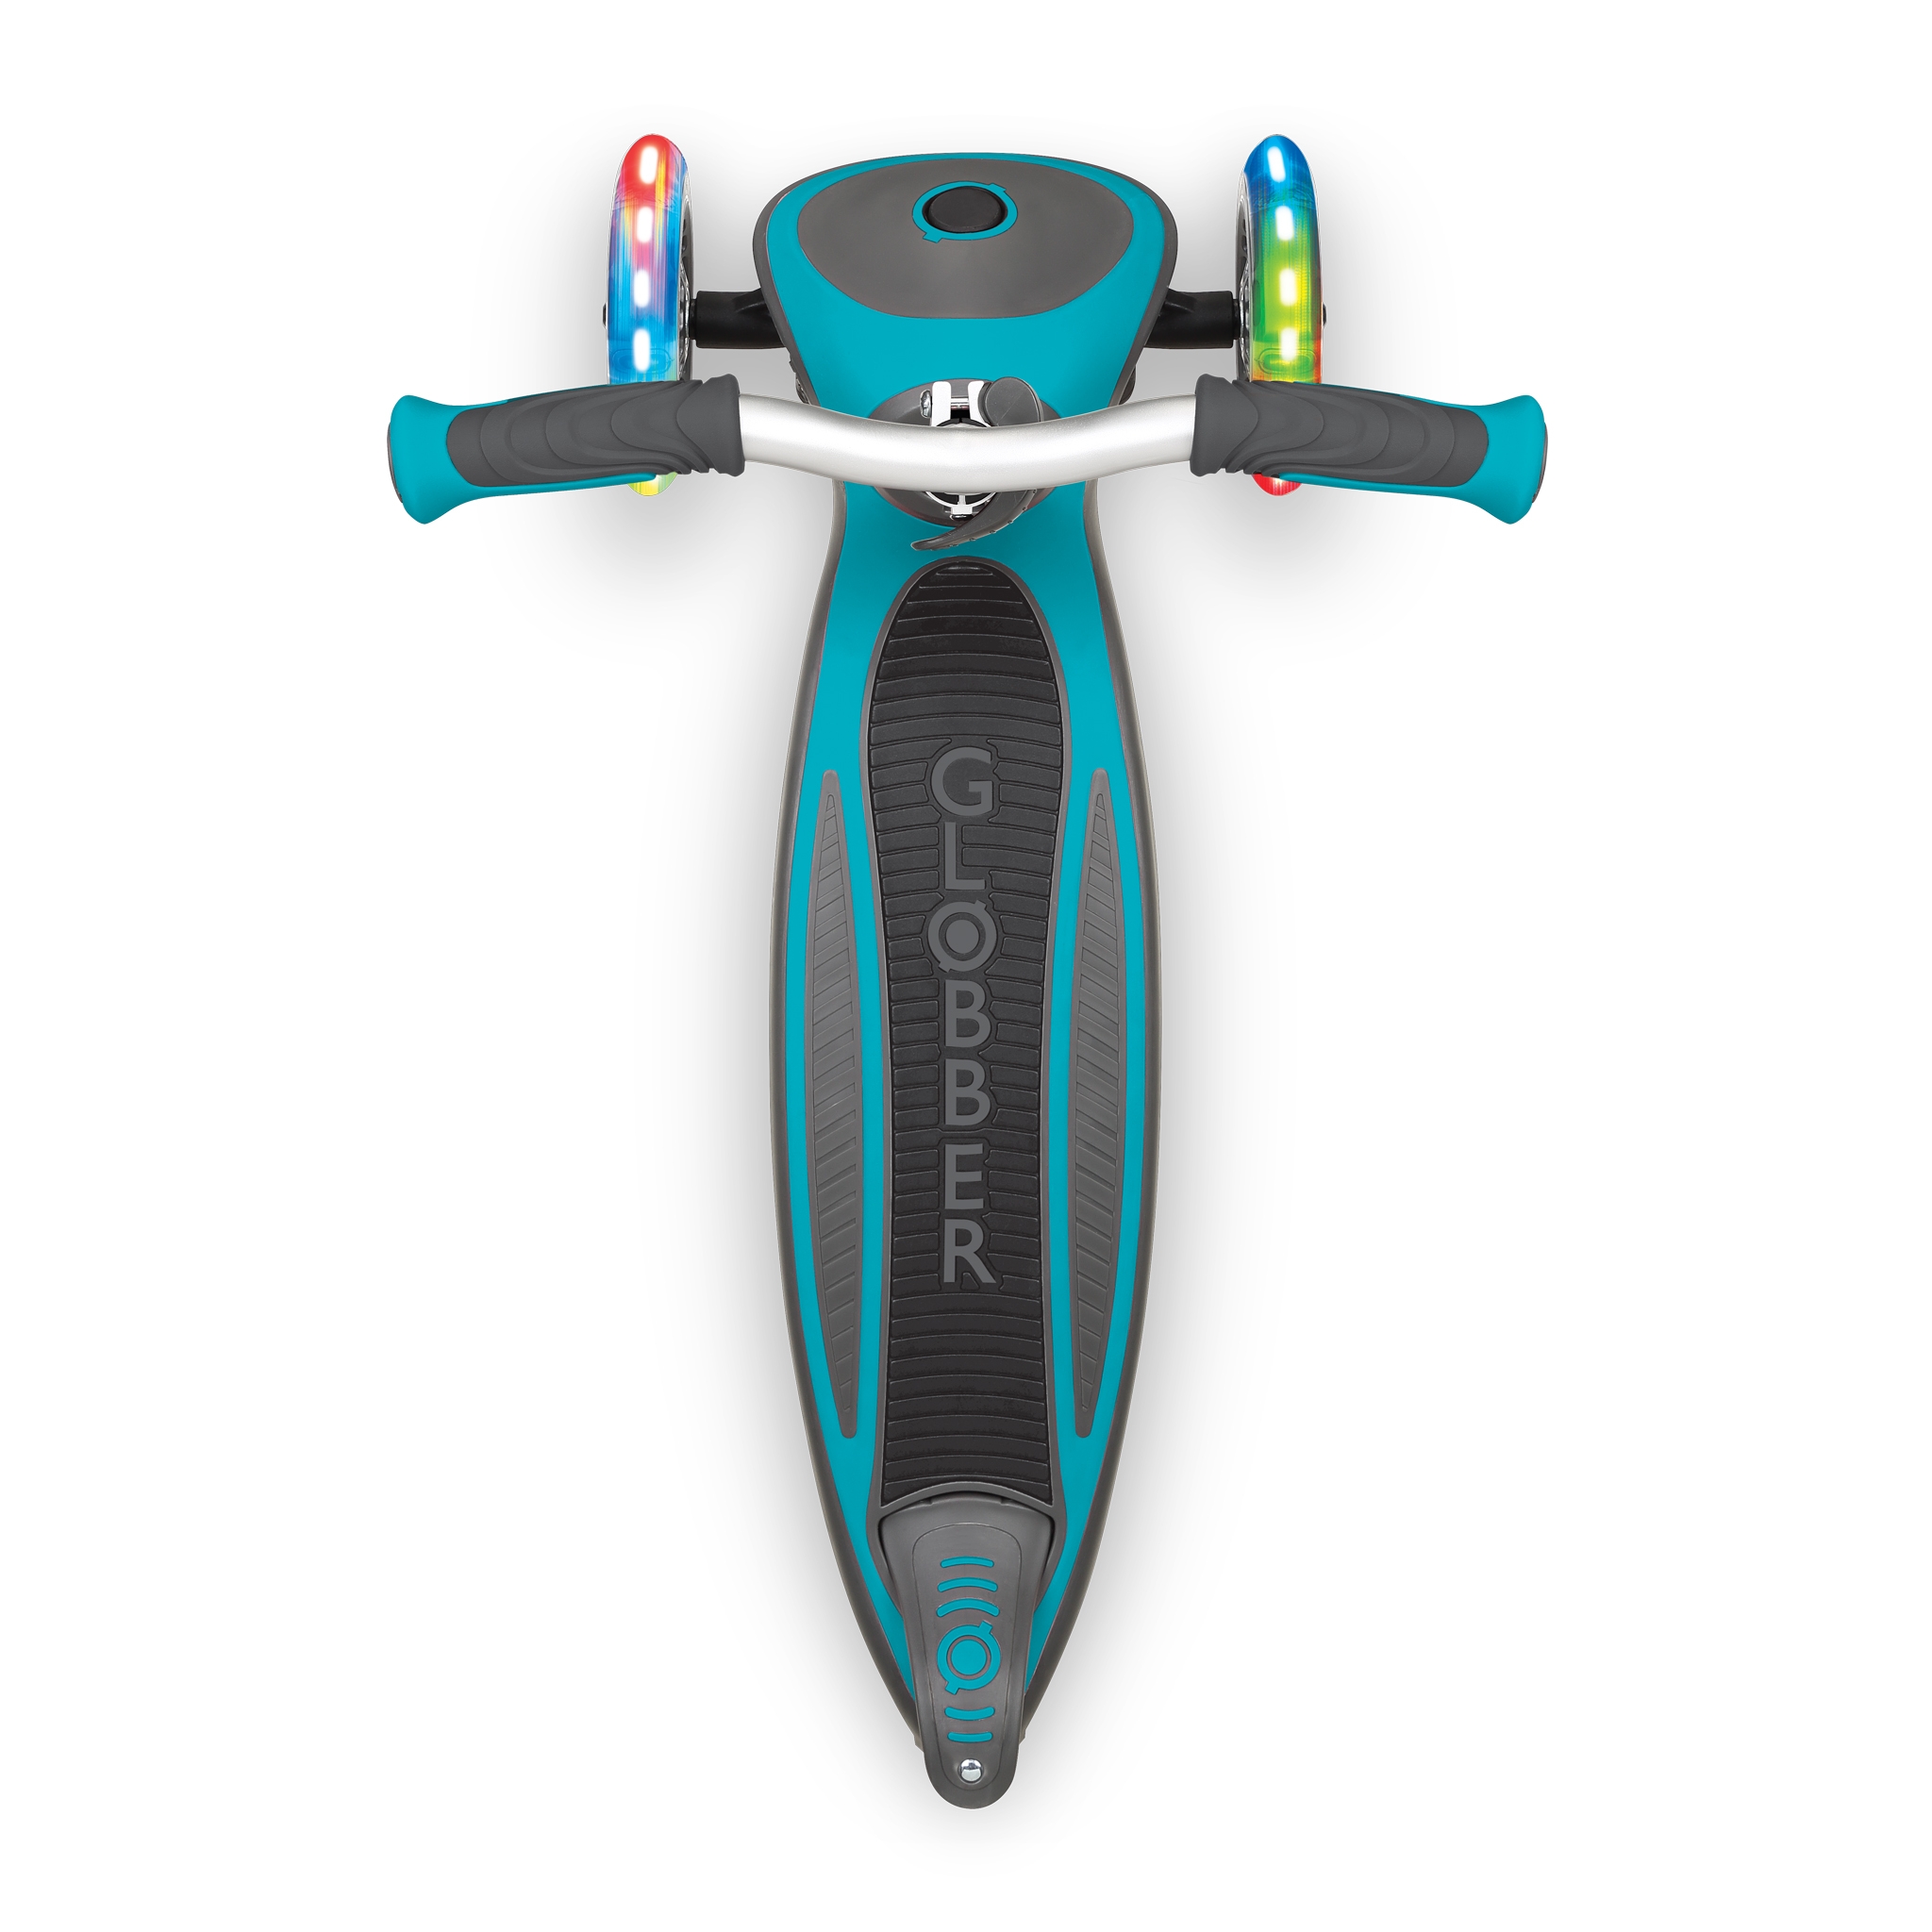 Globber-MASTER-LIGHTS-3-wheel-foldable-light-up-scooter-for-kids-with-extra-wide-anti-slip-deck-for-comfortable-rides_teal 0